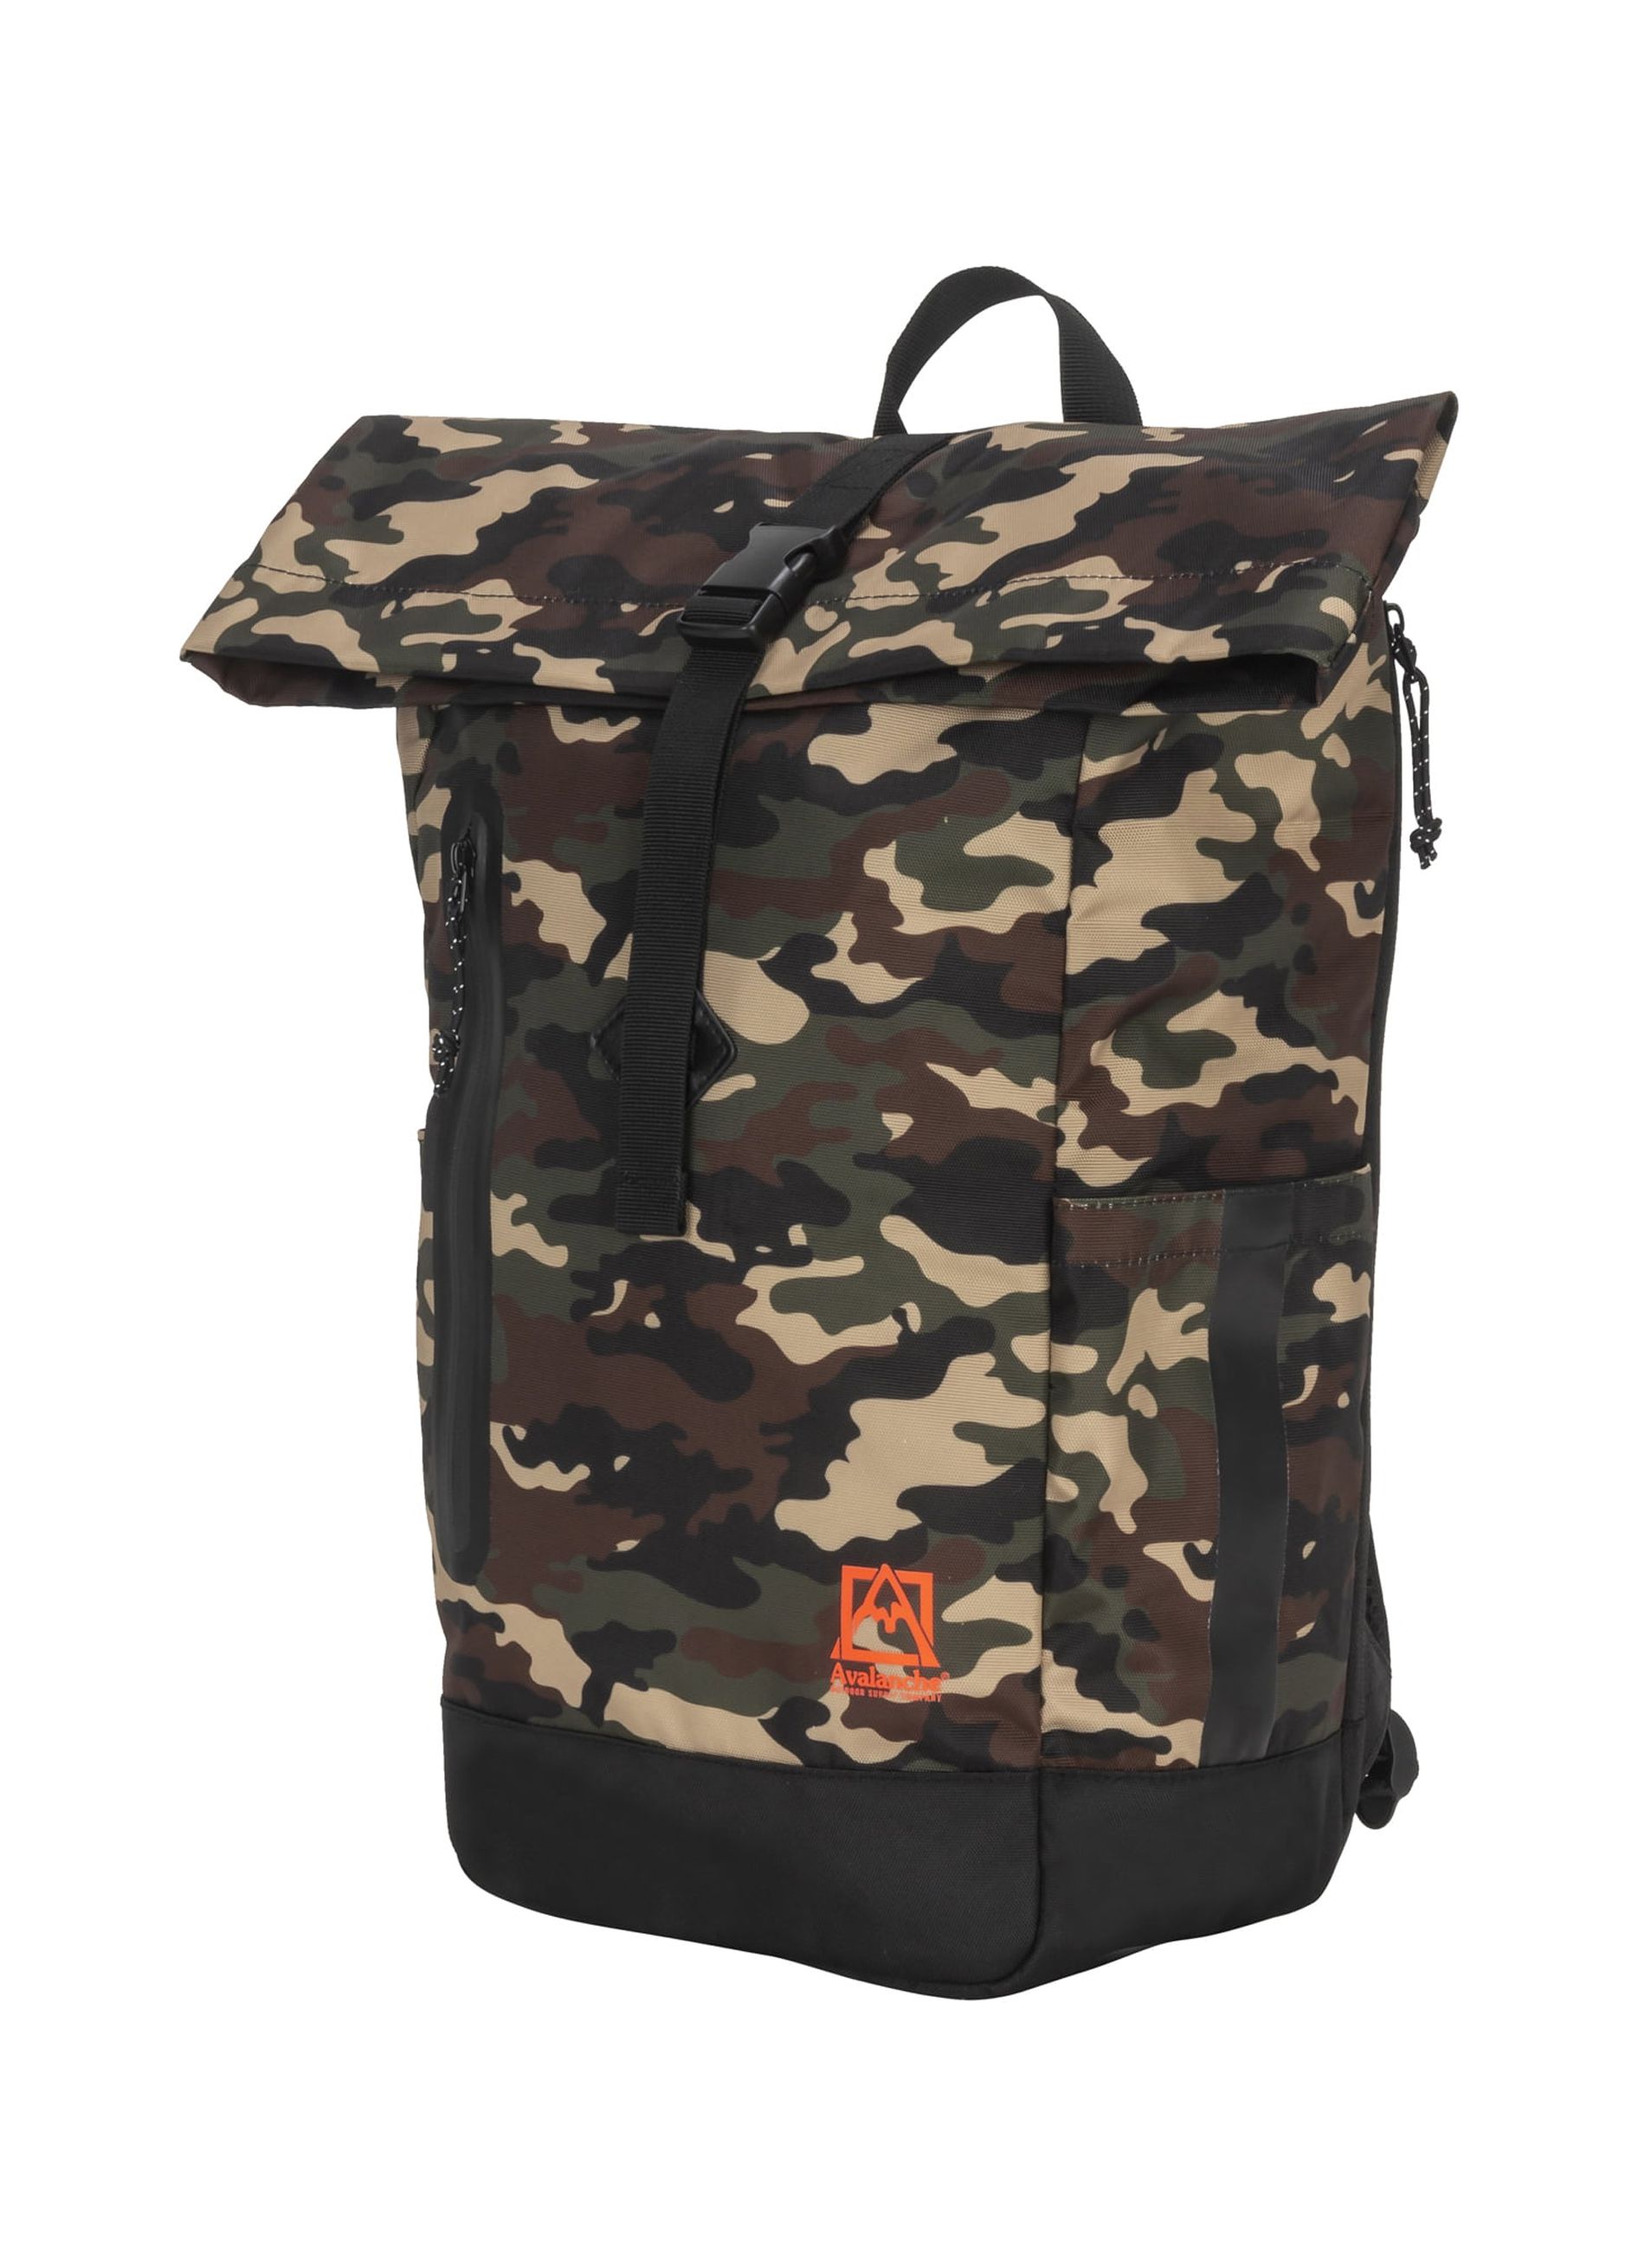 Avalanche Outdoors Eco Friendly Recycled 900D Polyester 20L Roll Top Backpack - image 1 of 4